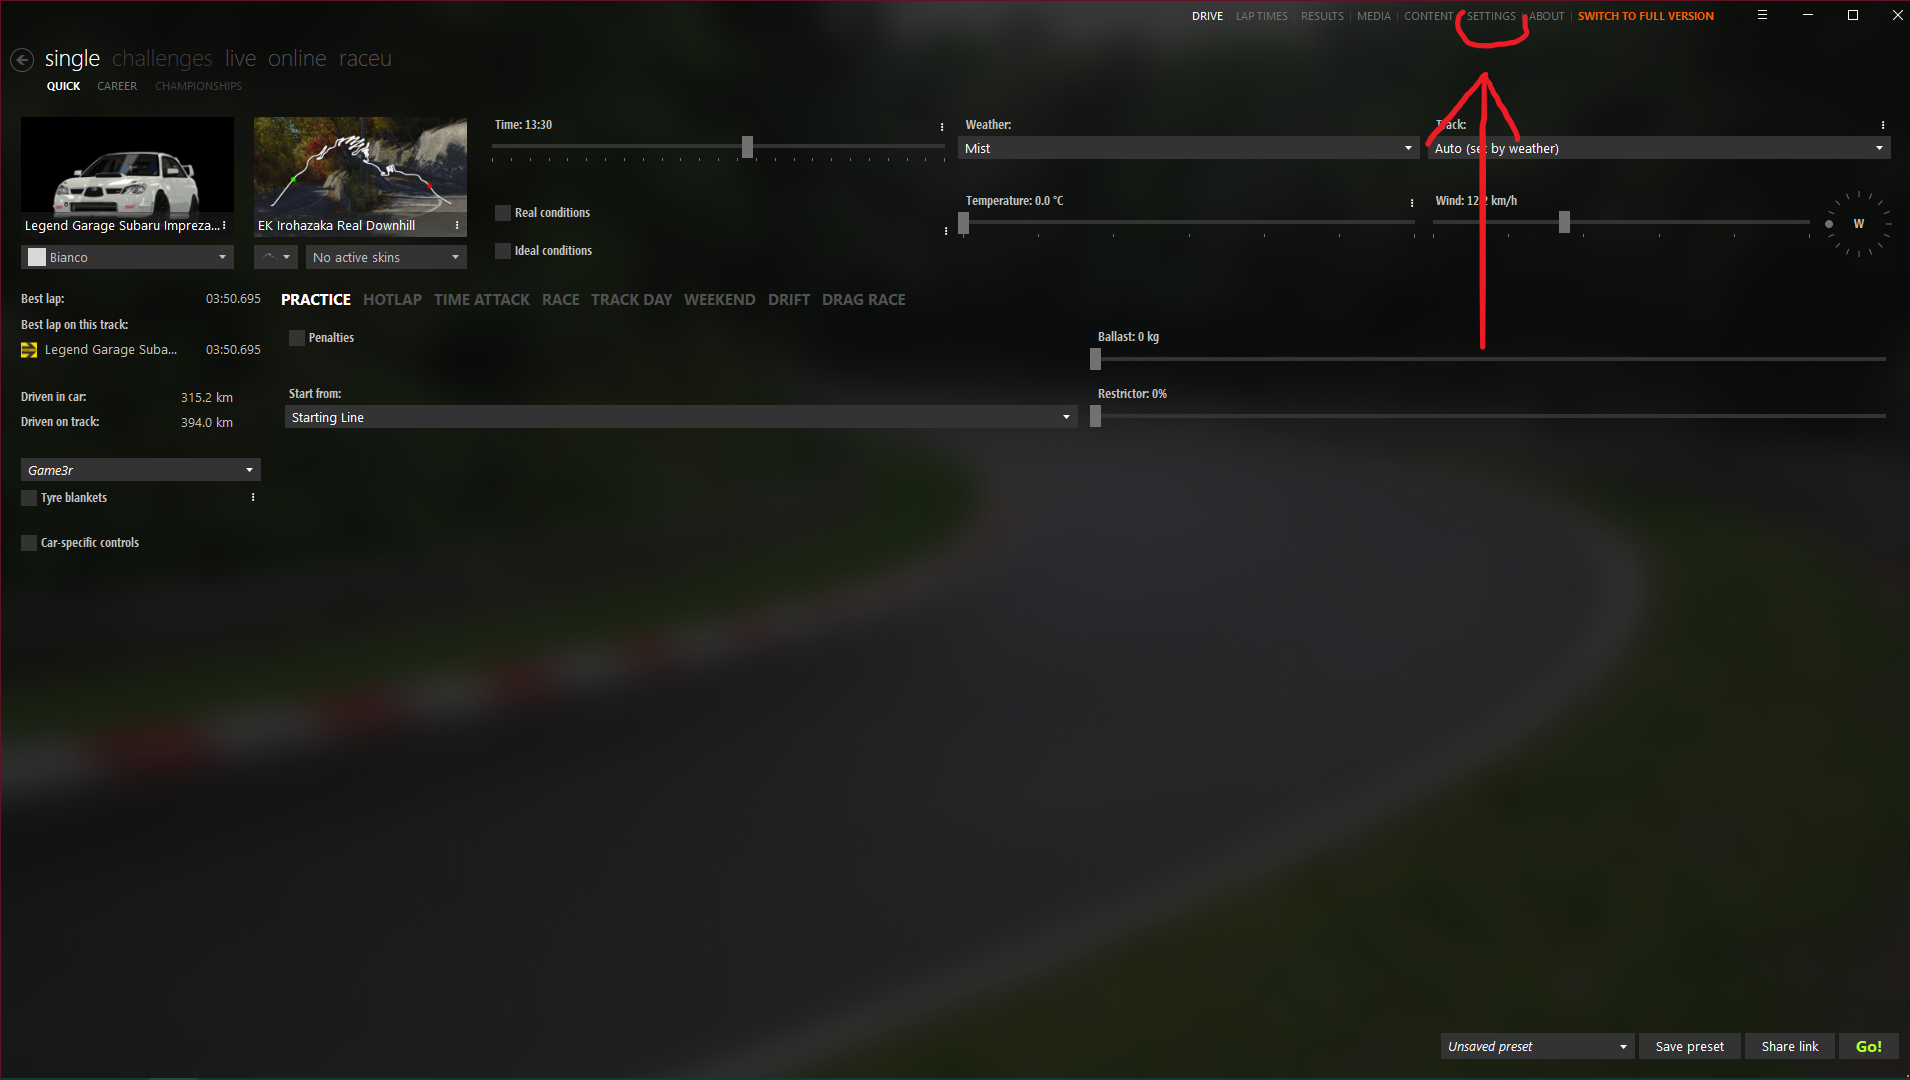 Assetto Corsa Content Manager Settings Tutorial + Reshade Settings